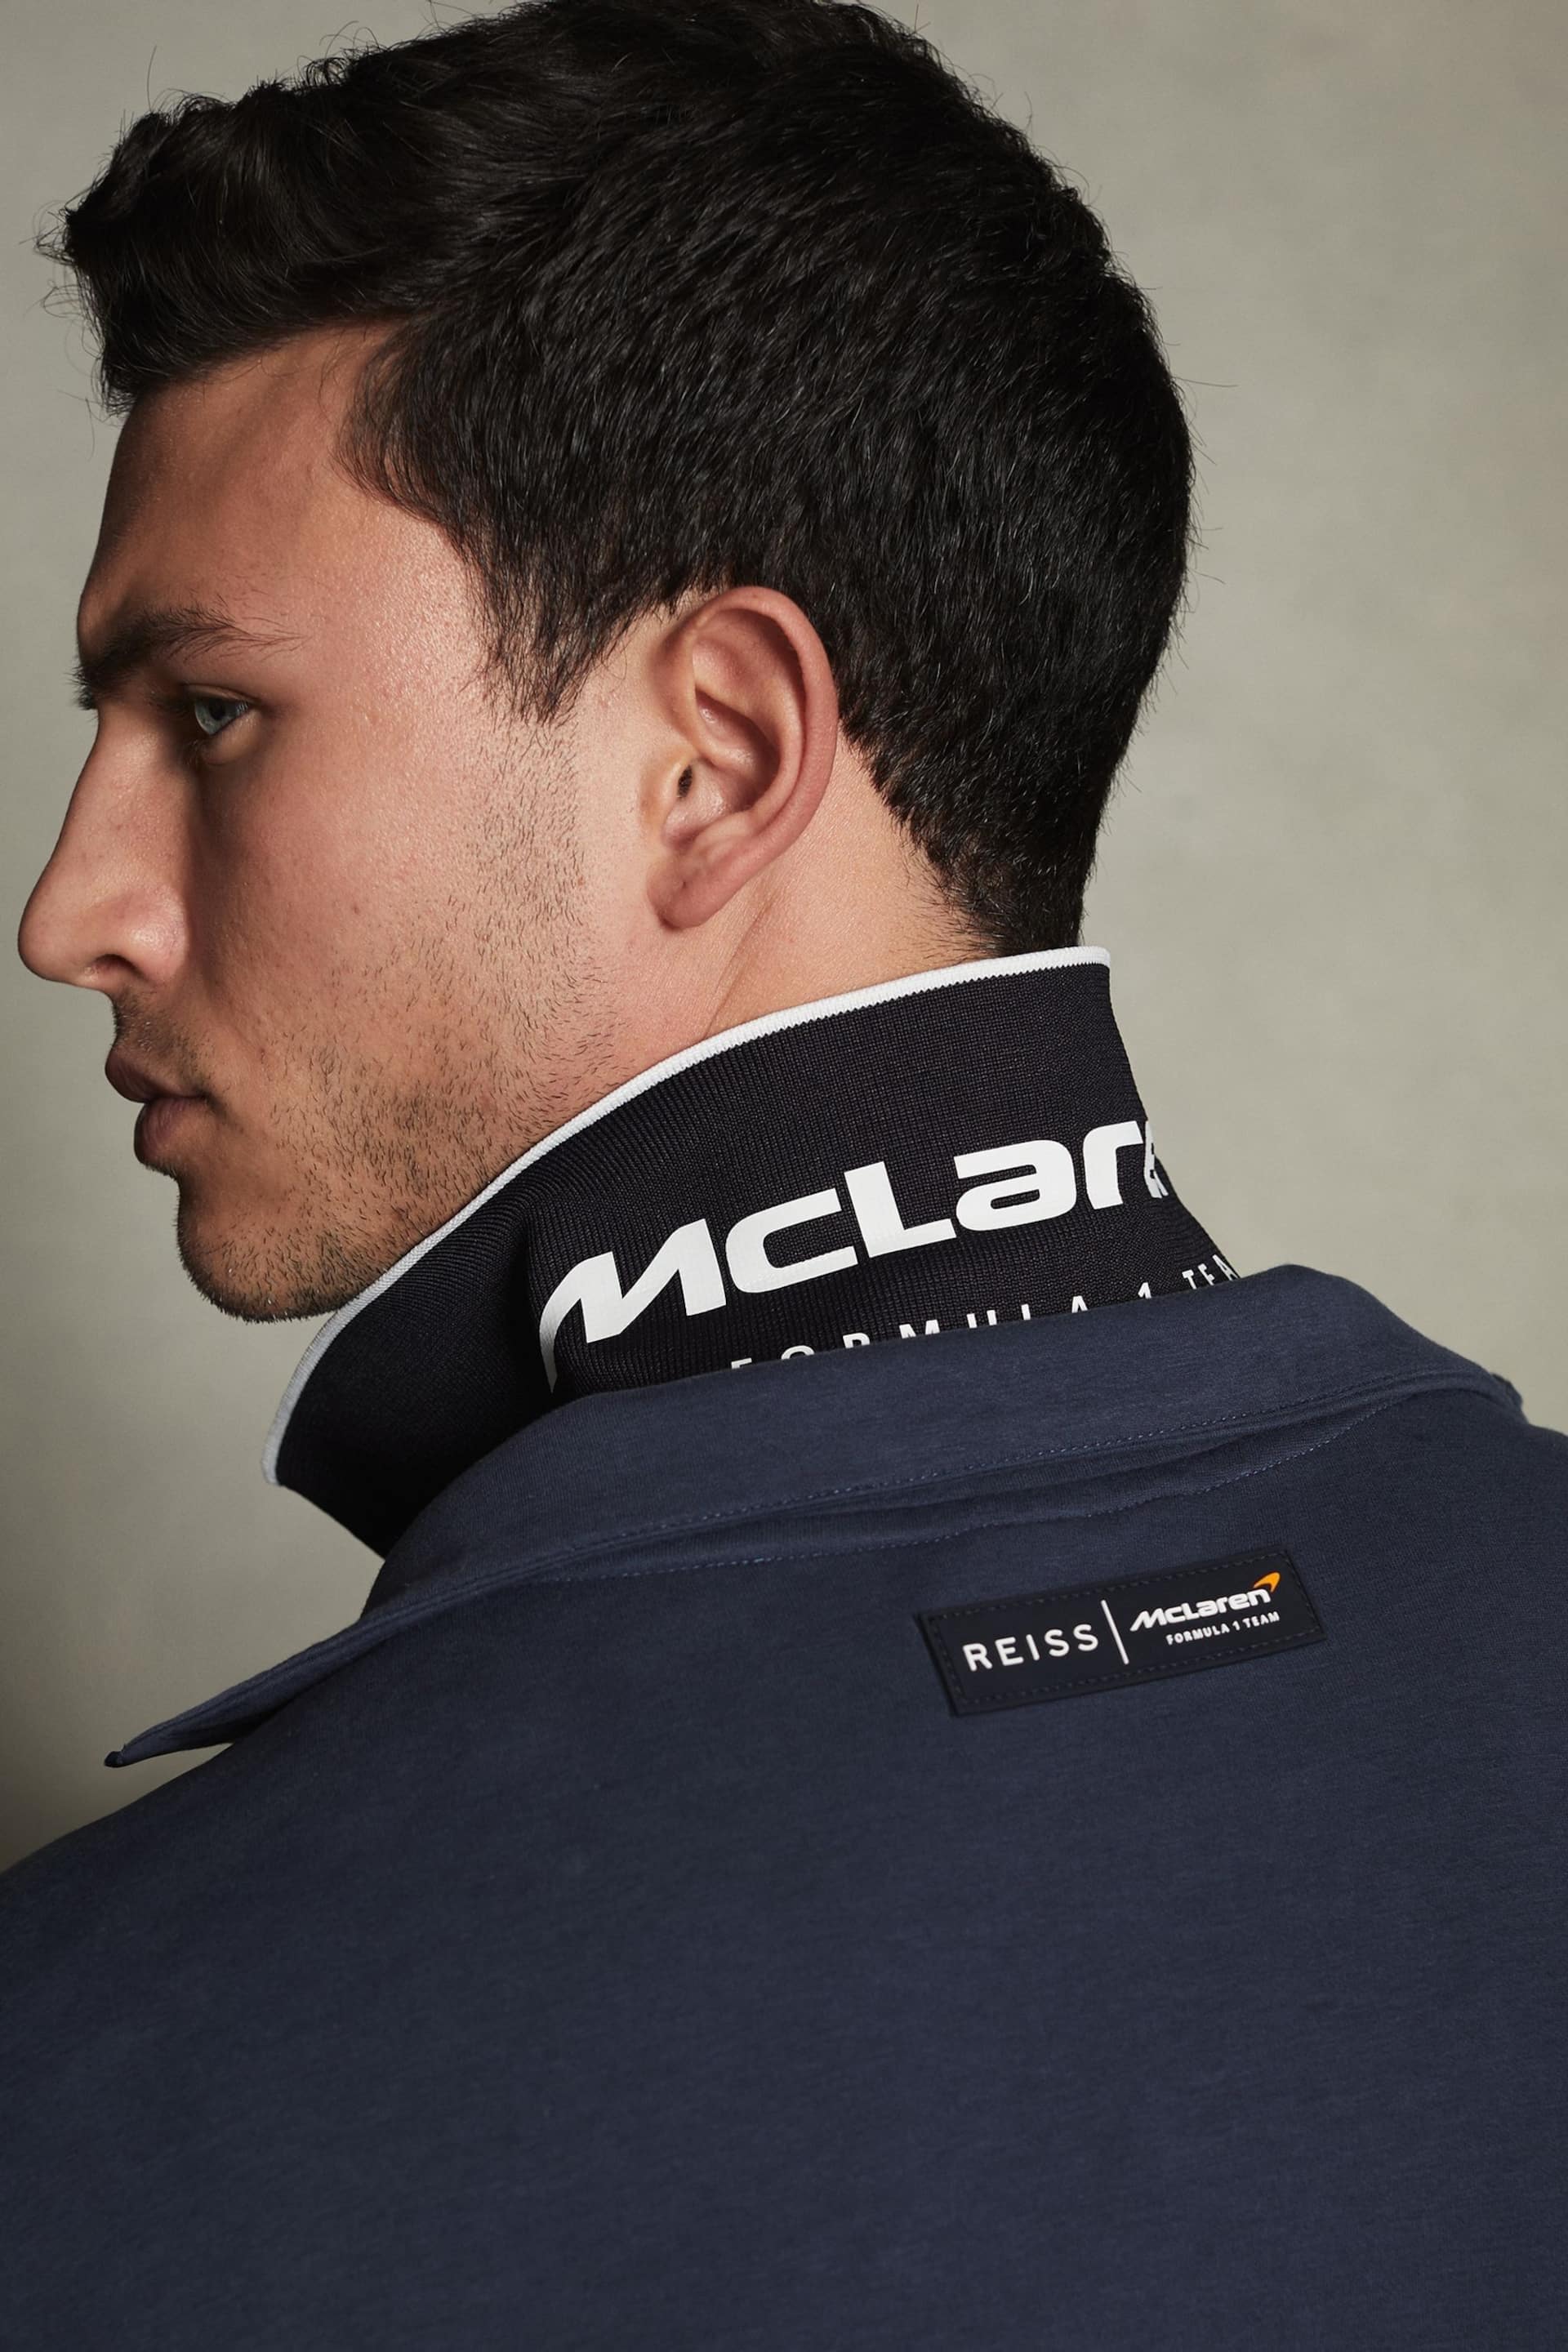 McLaren F1 Hybrid Quilt and Jersey Jacket - Image 4 of 7